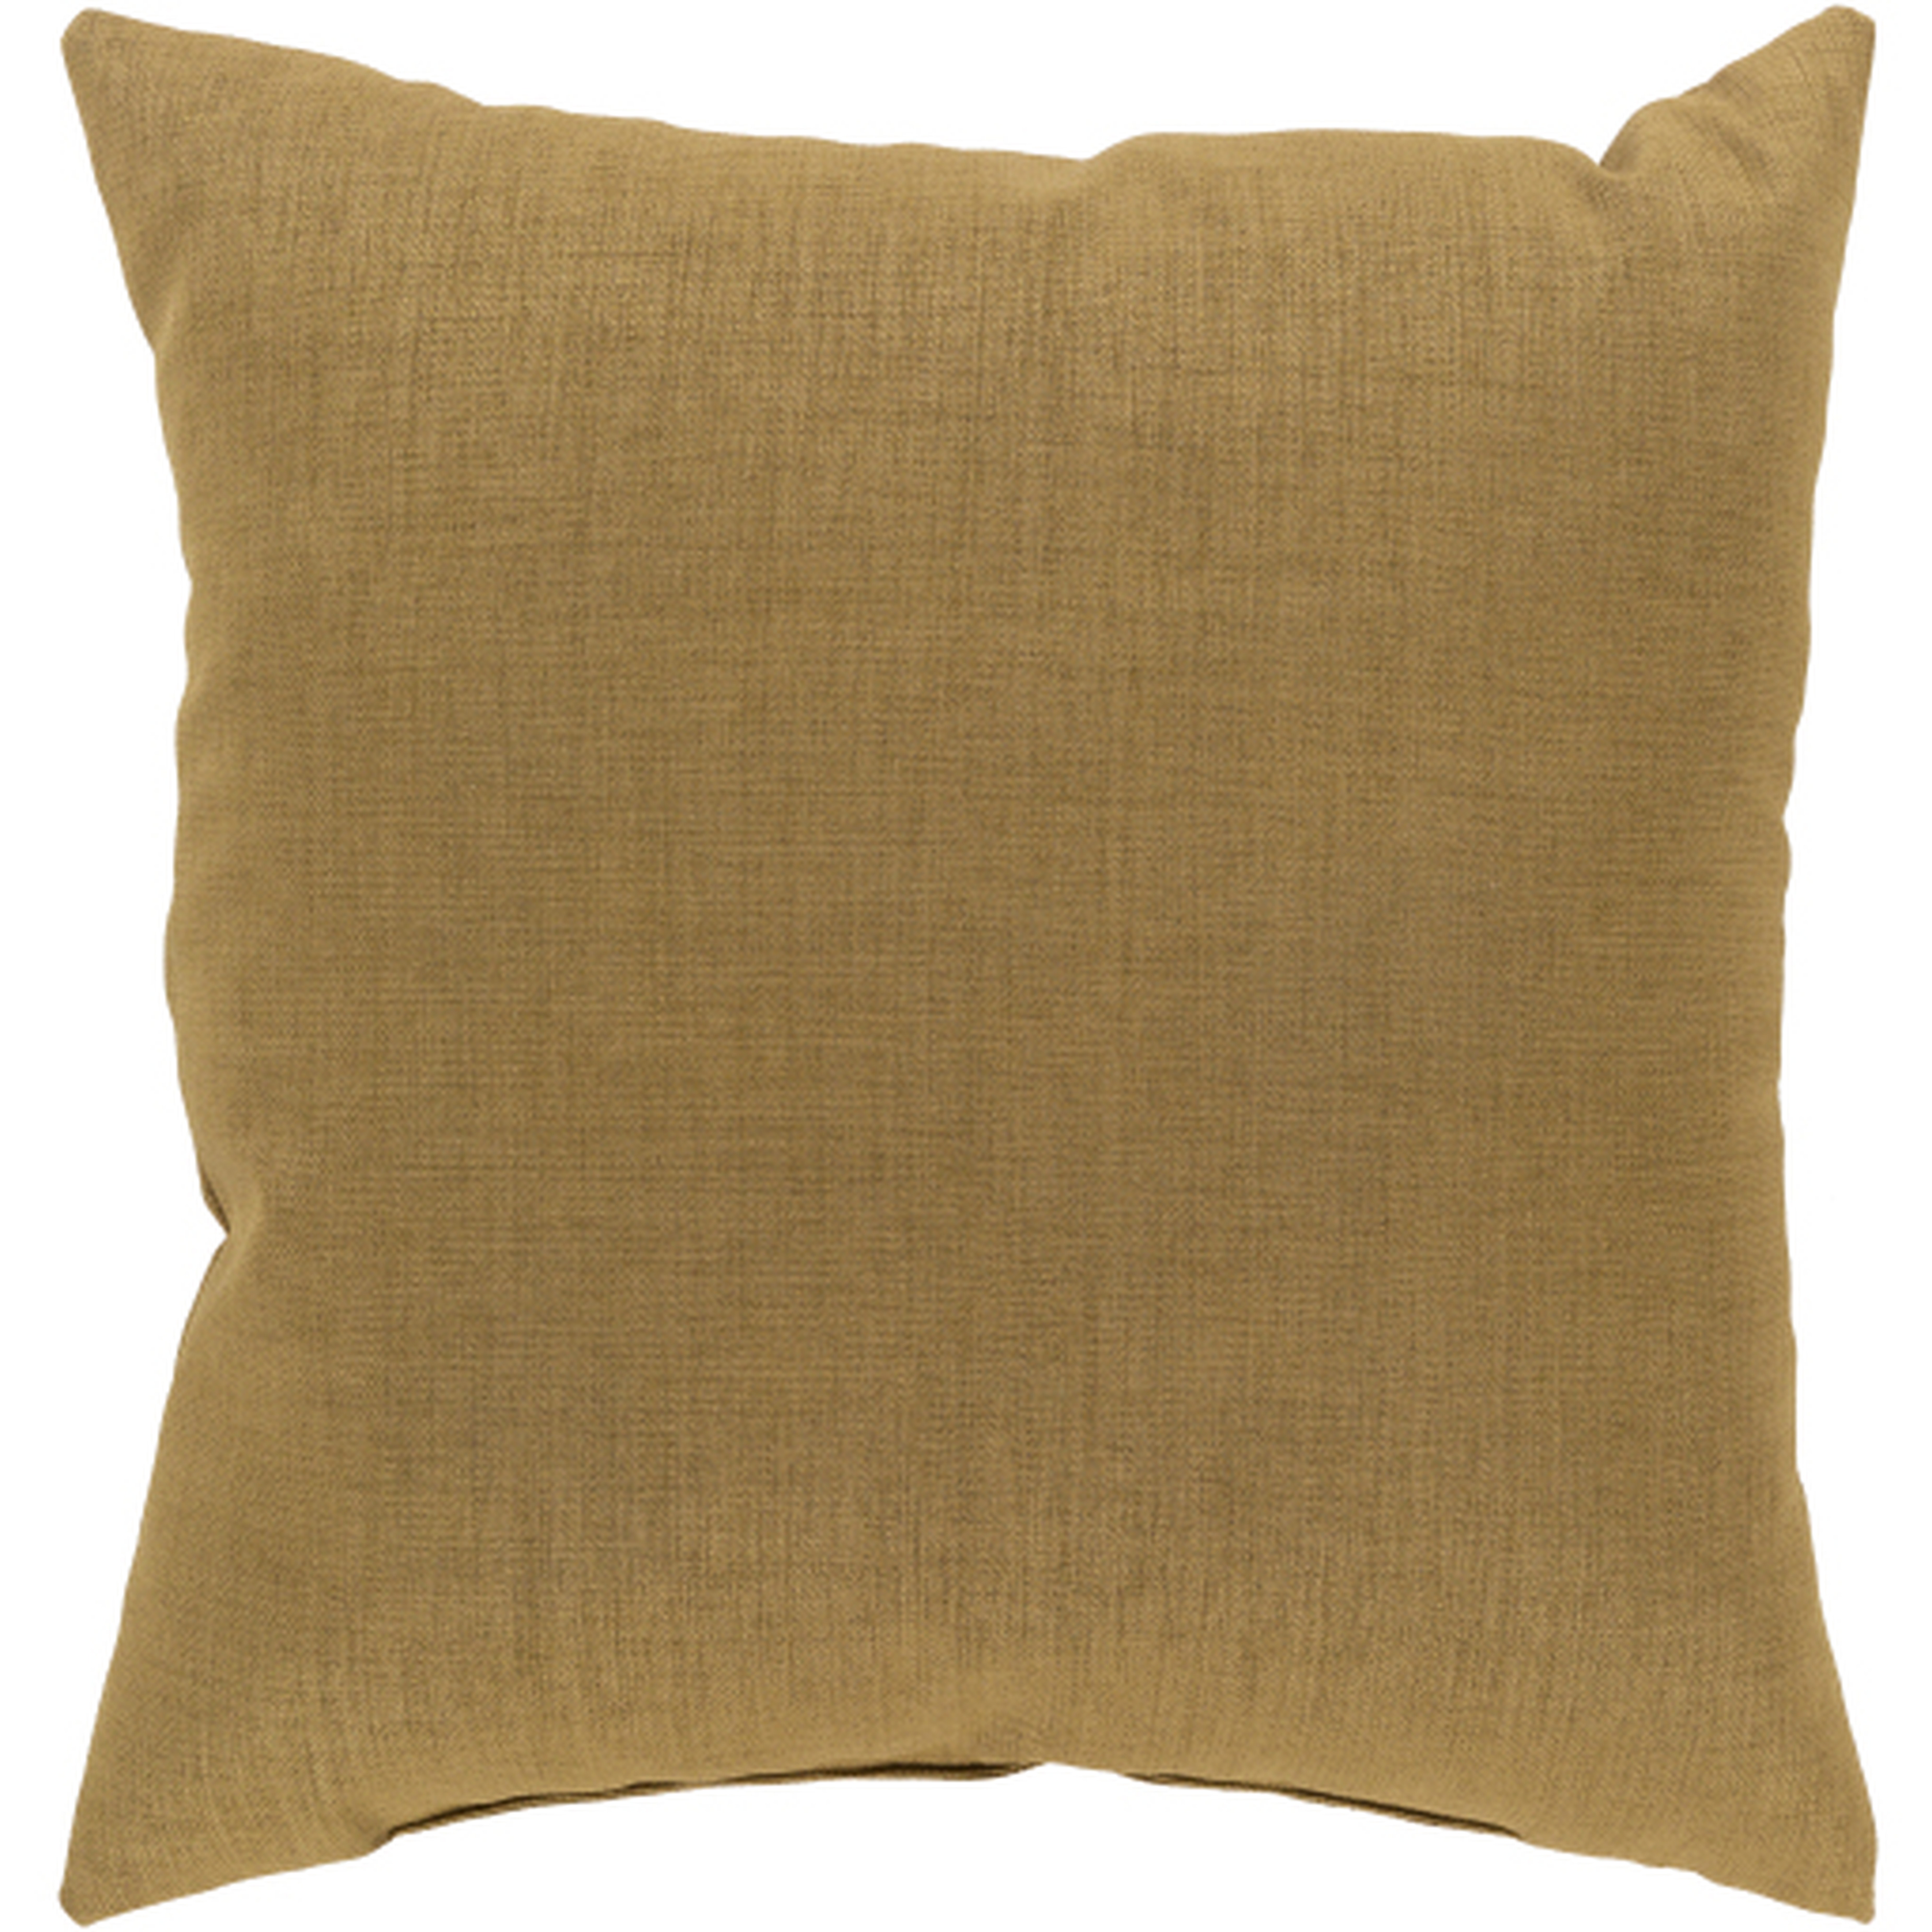 Storm Throw Pillow, 22" x 22", pillow cover only - Surya